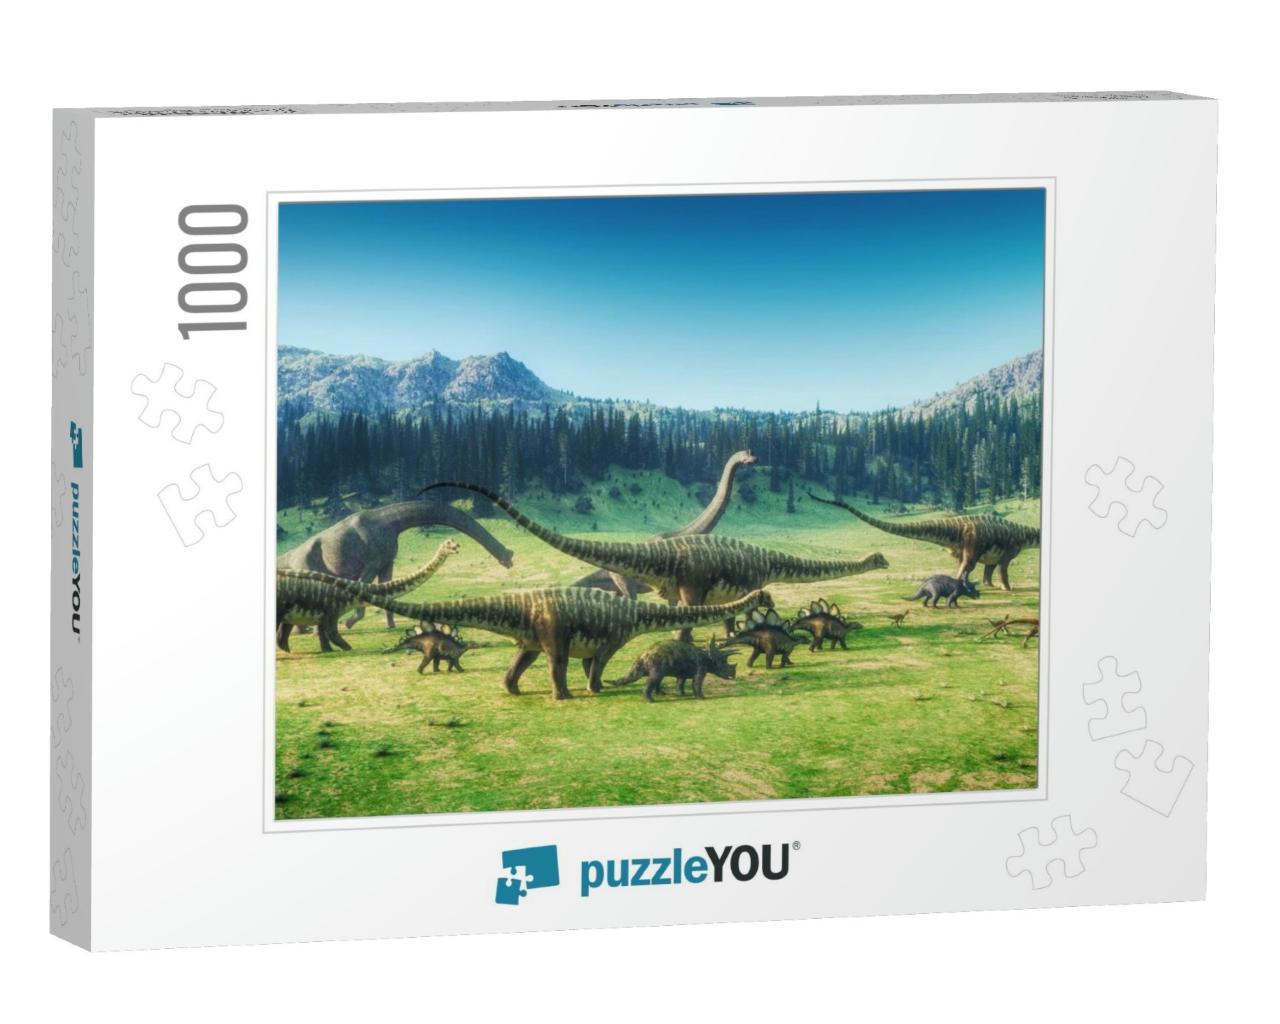 Dinosaurs on the Valley. This is a 3D Render Illustration... Jigsaw Puzzle with 1000 pieces